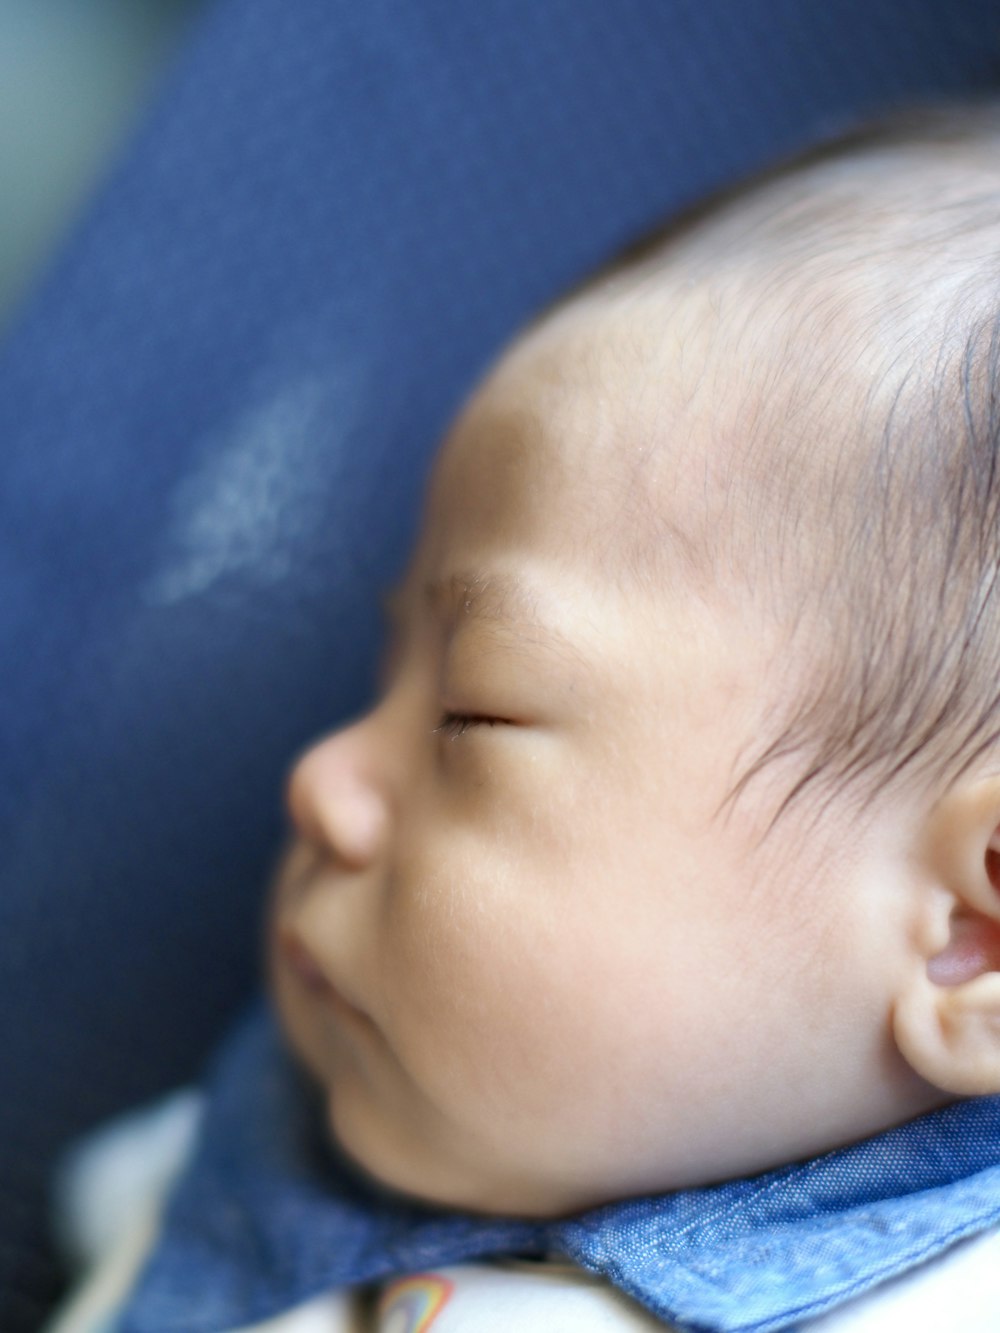 a close up of a baby sleeping on a blue blanket